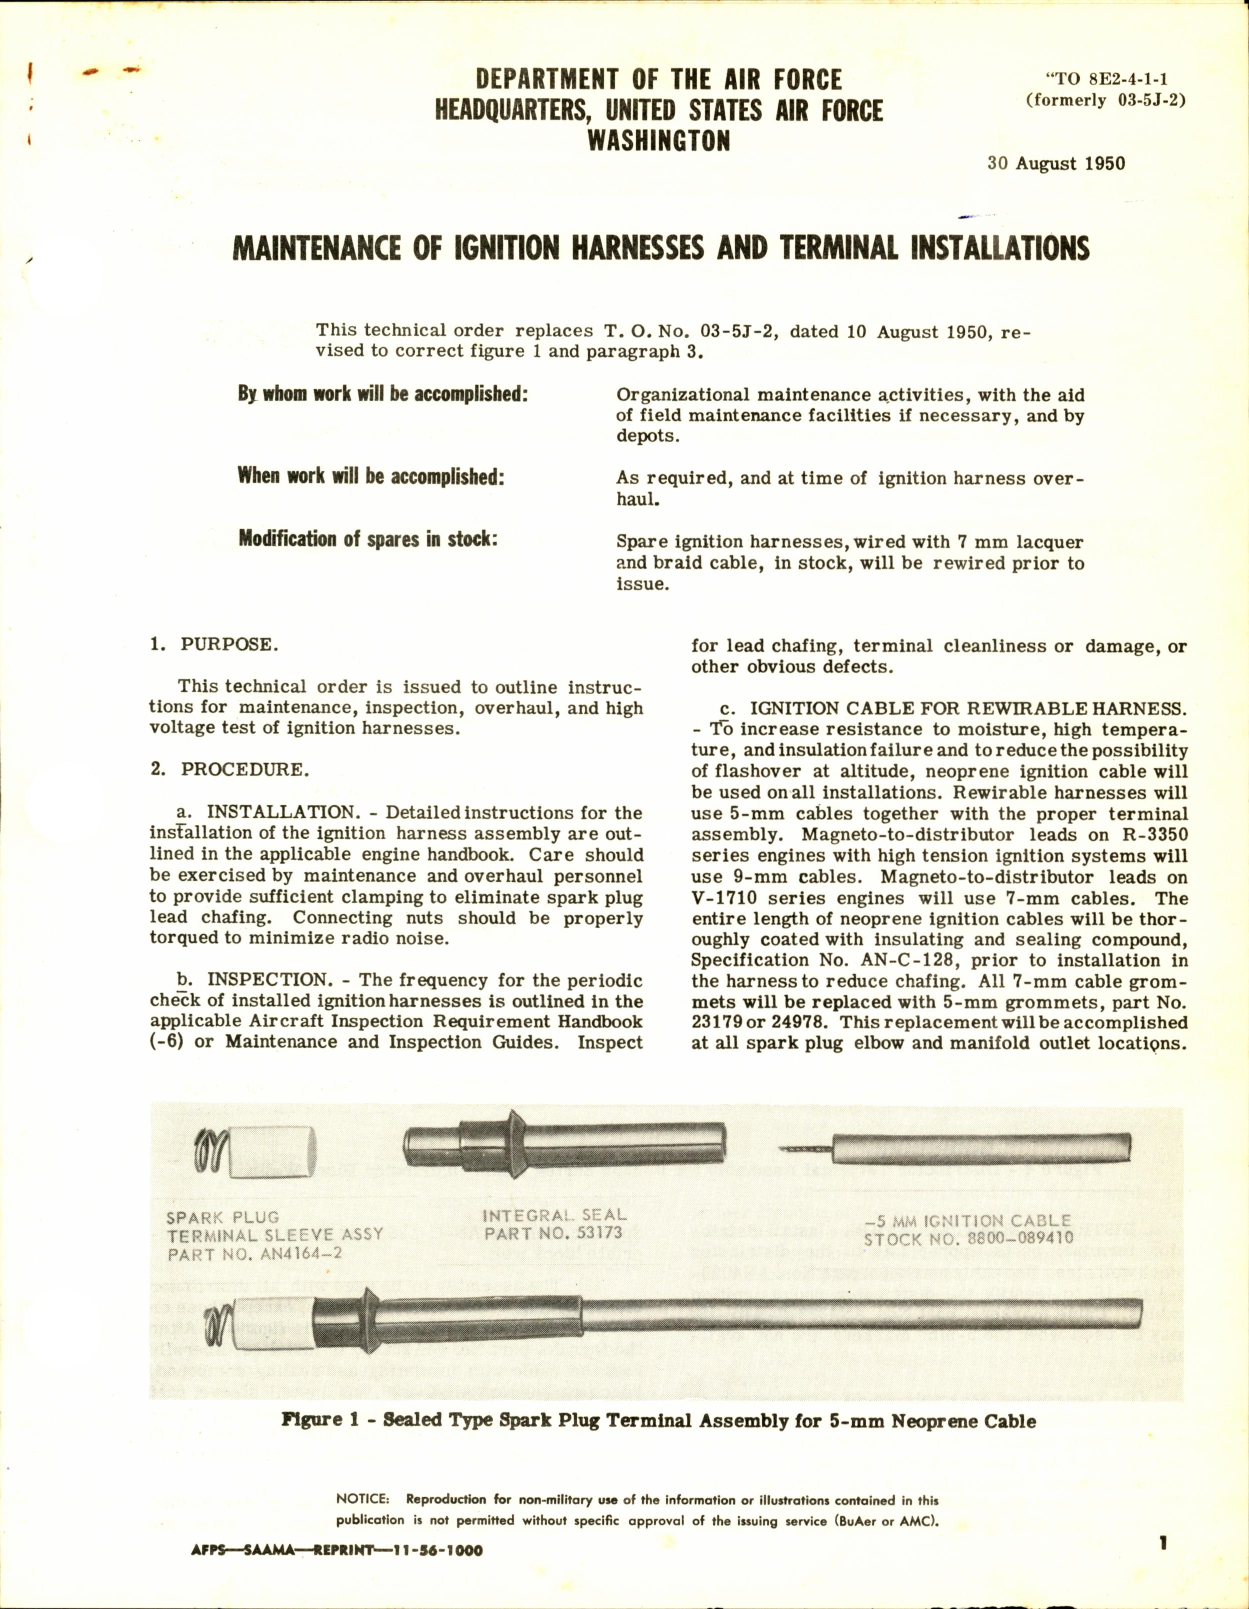 Sample page 1 from AirCorps Library document: Maintenance of Ignition Harnesses & Terminal Installations